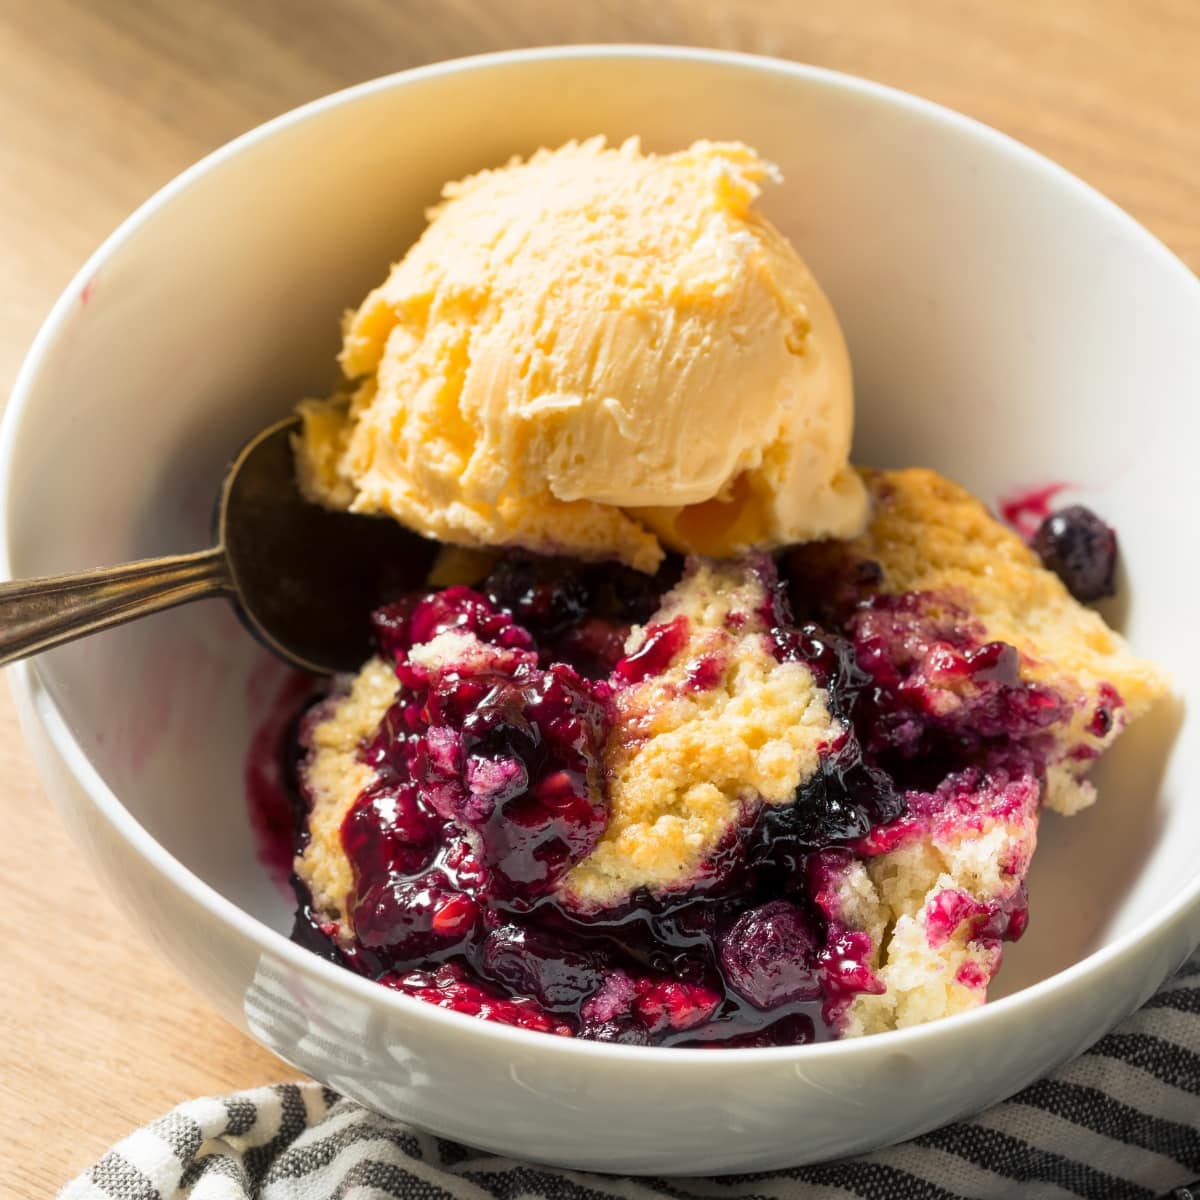 Homemade Berry Cobbler with Vanilla Ice Cream in a White Bowl with a Spoon